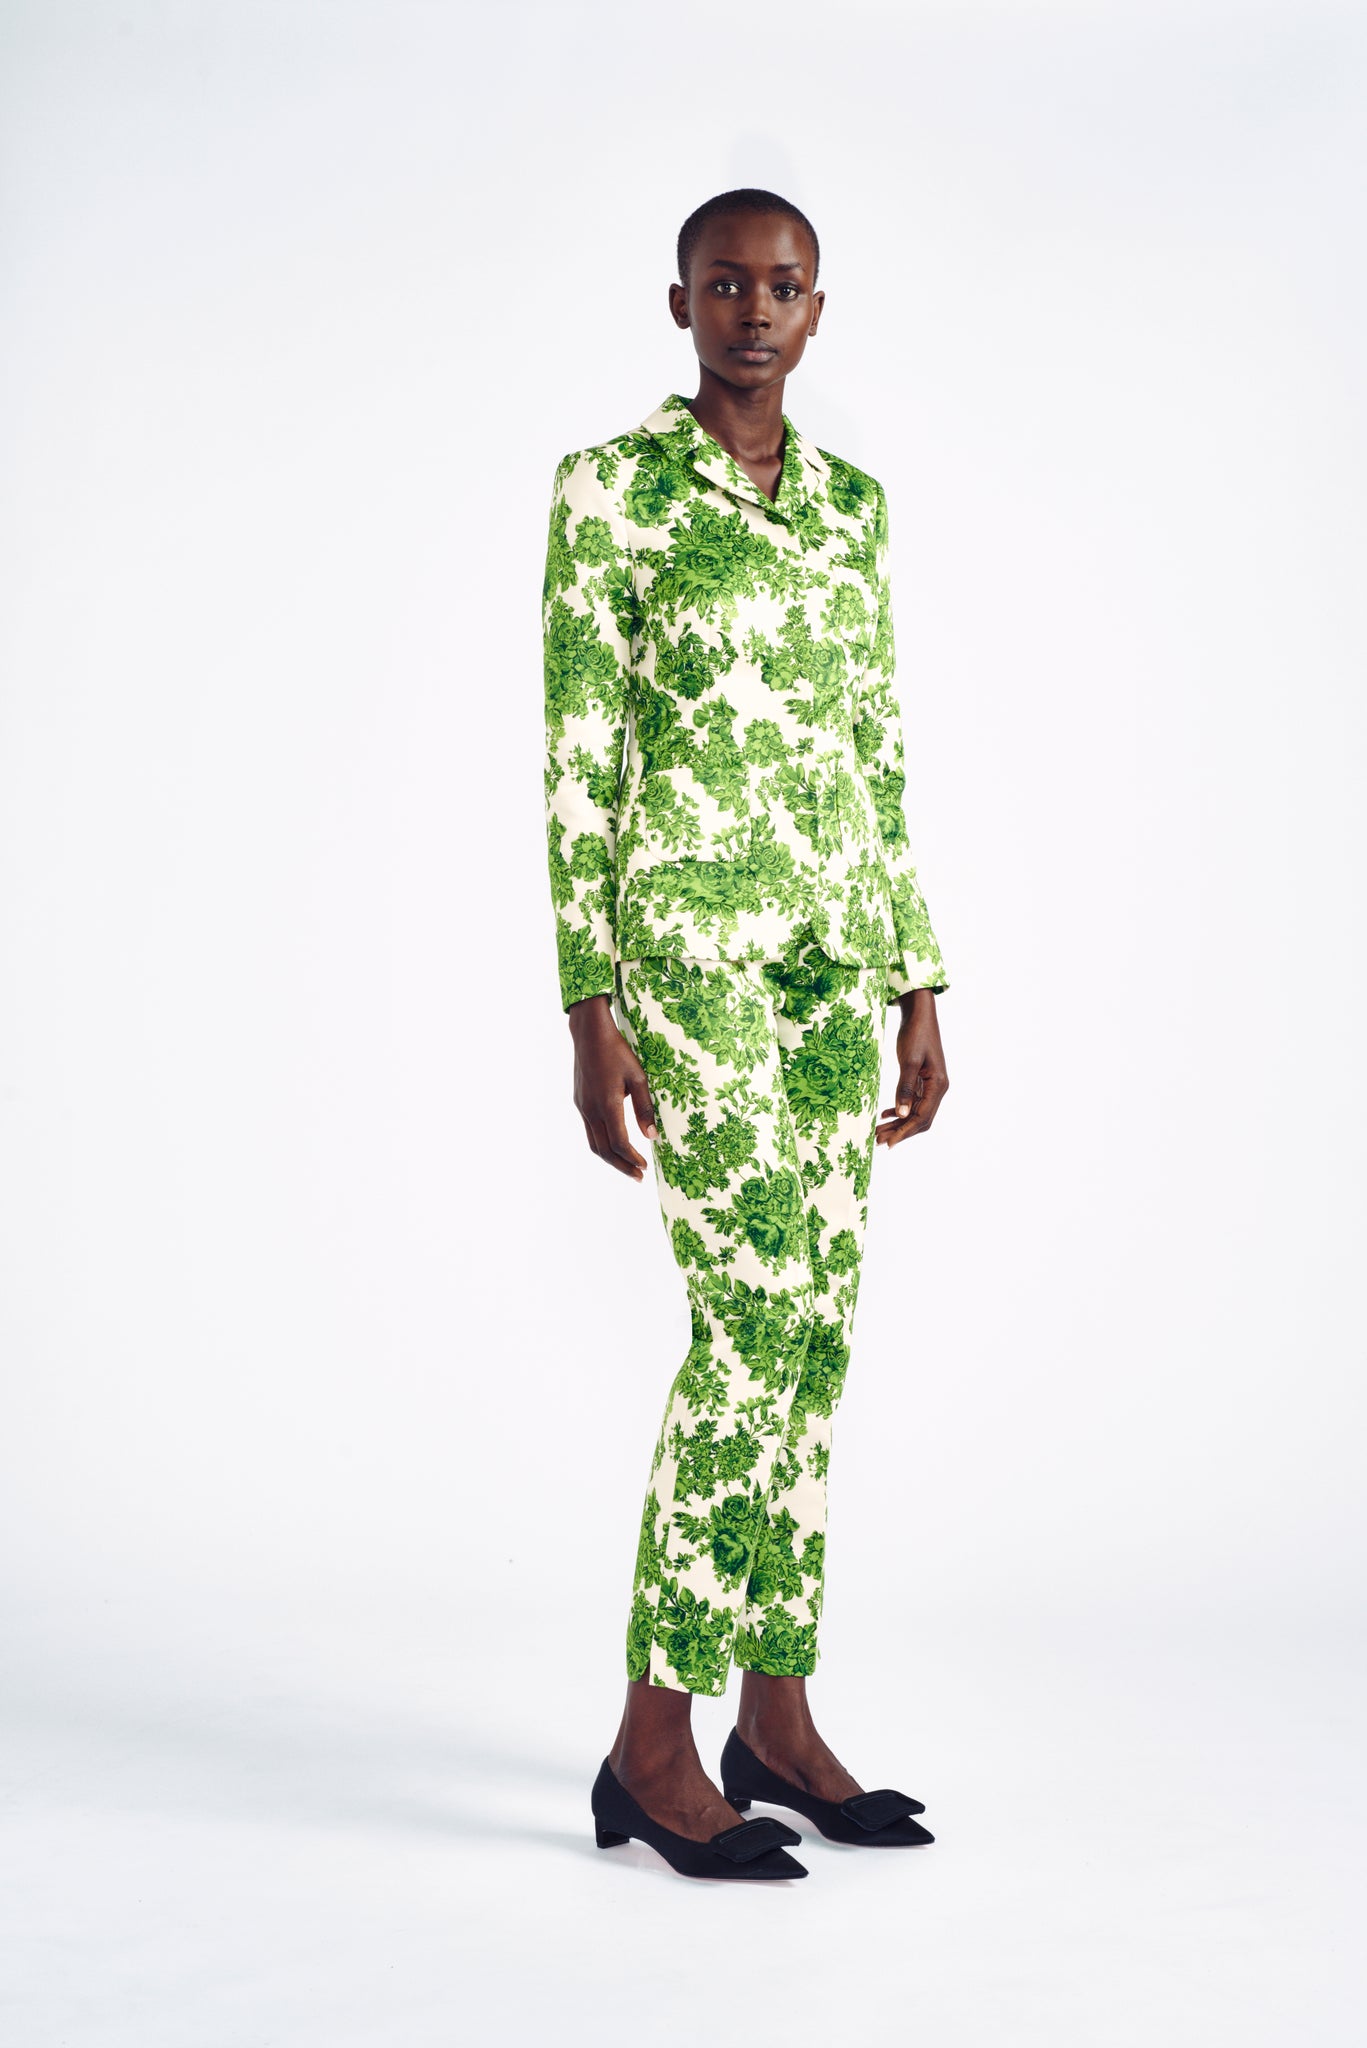 Petra Dress | Green and White Rose Printed Jacket in Tafetta Faille  | Emilia Wickstead